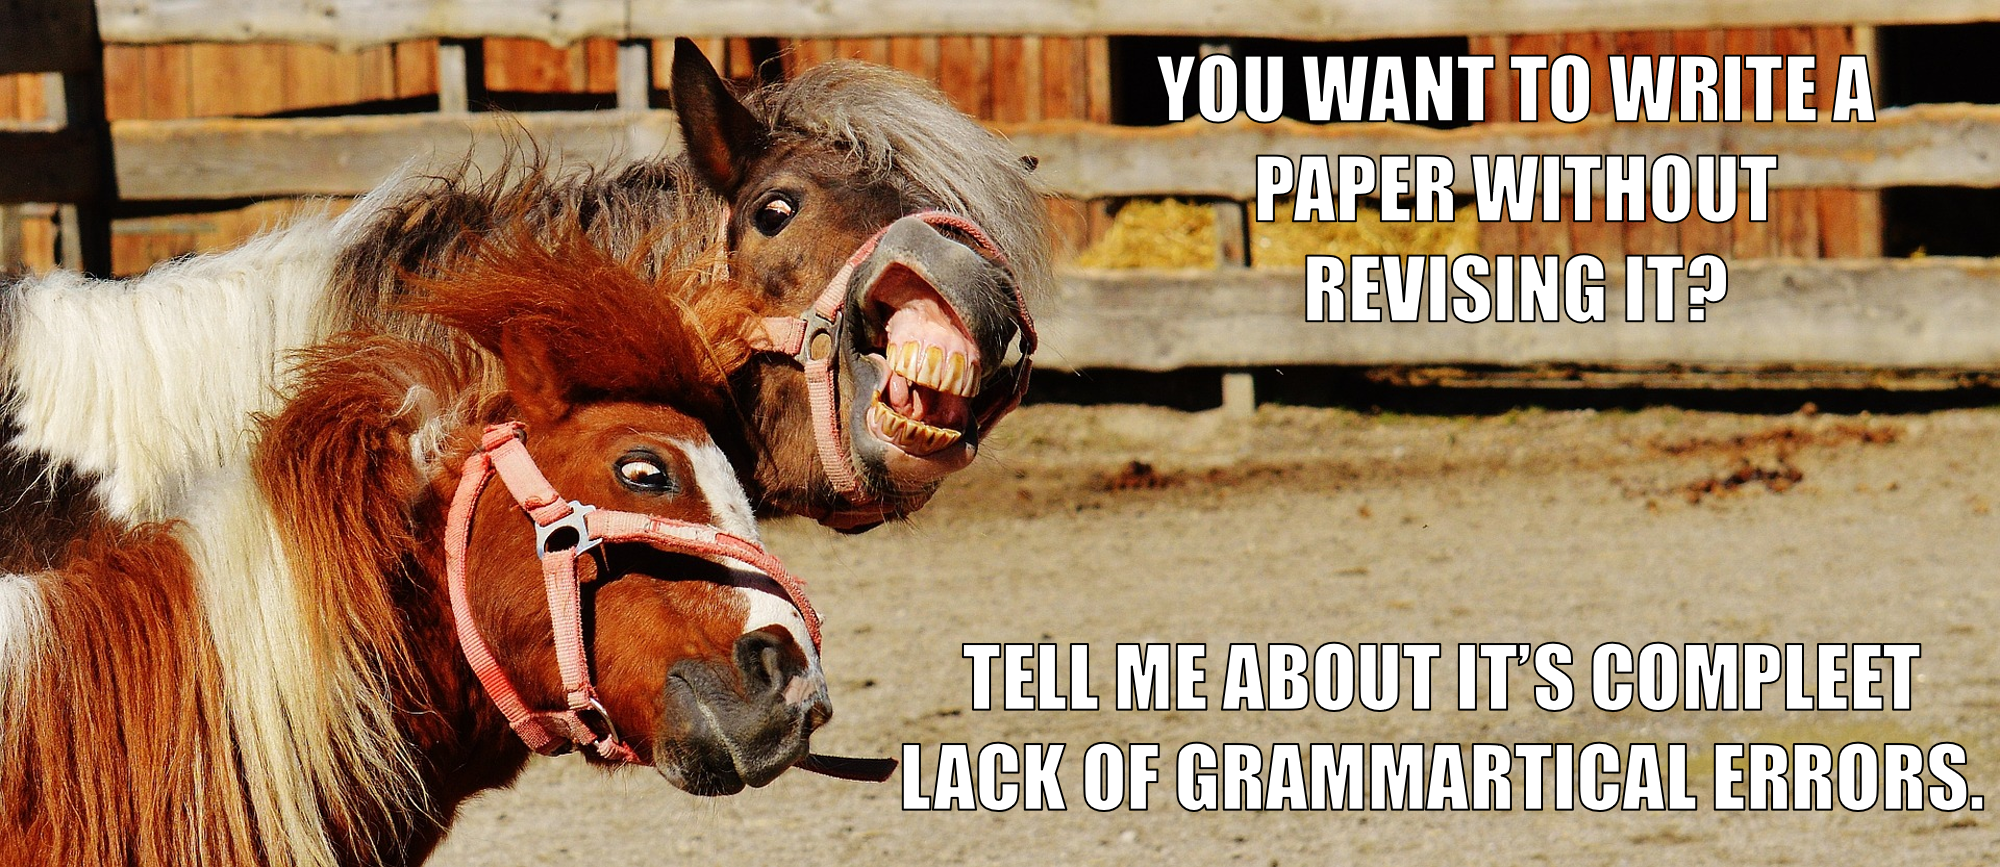 Meme - 2 horses making comical expressions. You want to write a paper without revising it? Tell me about it's compleet lack of grammartical errors.